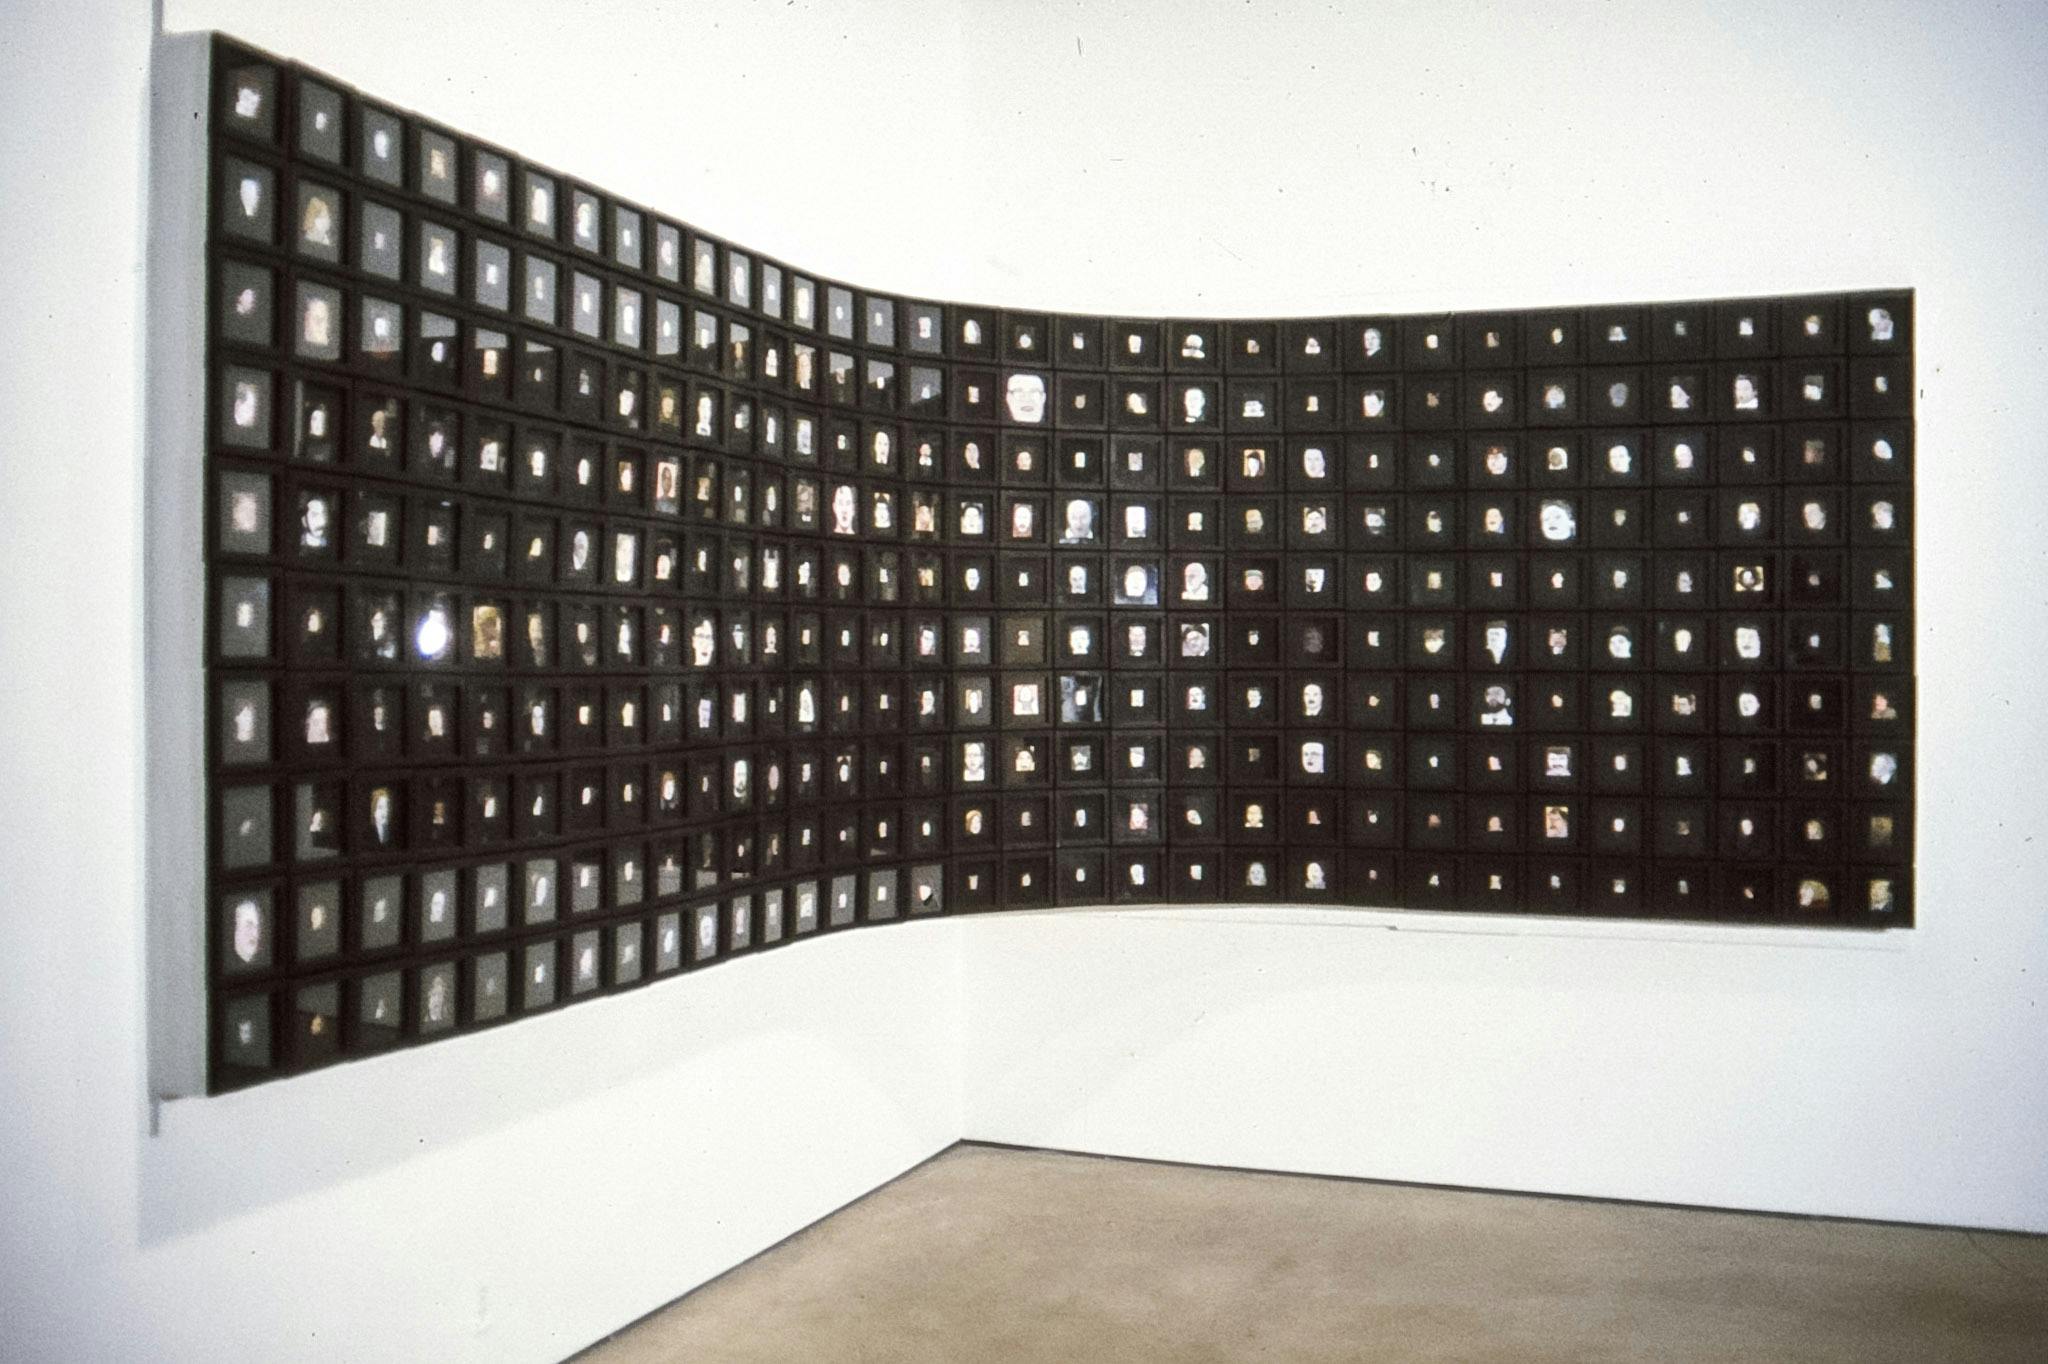 A photo collage of 320 small photographs of human faces mounted at a corner of the gallery space. Each photograph is black framed; some images are colored and some are black and white. 